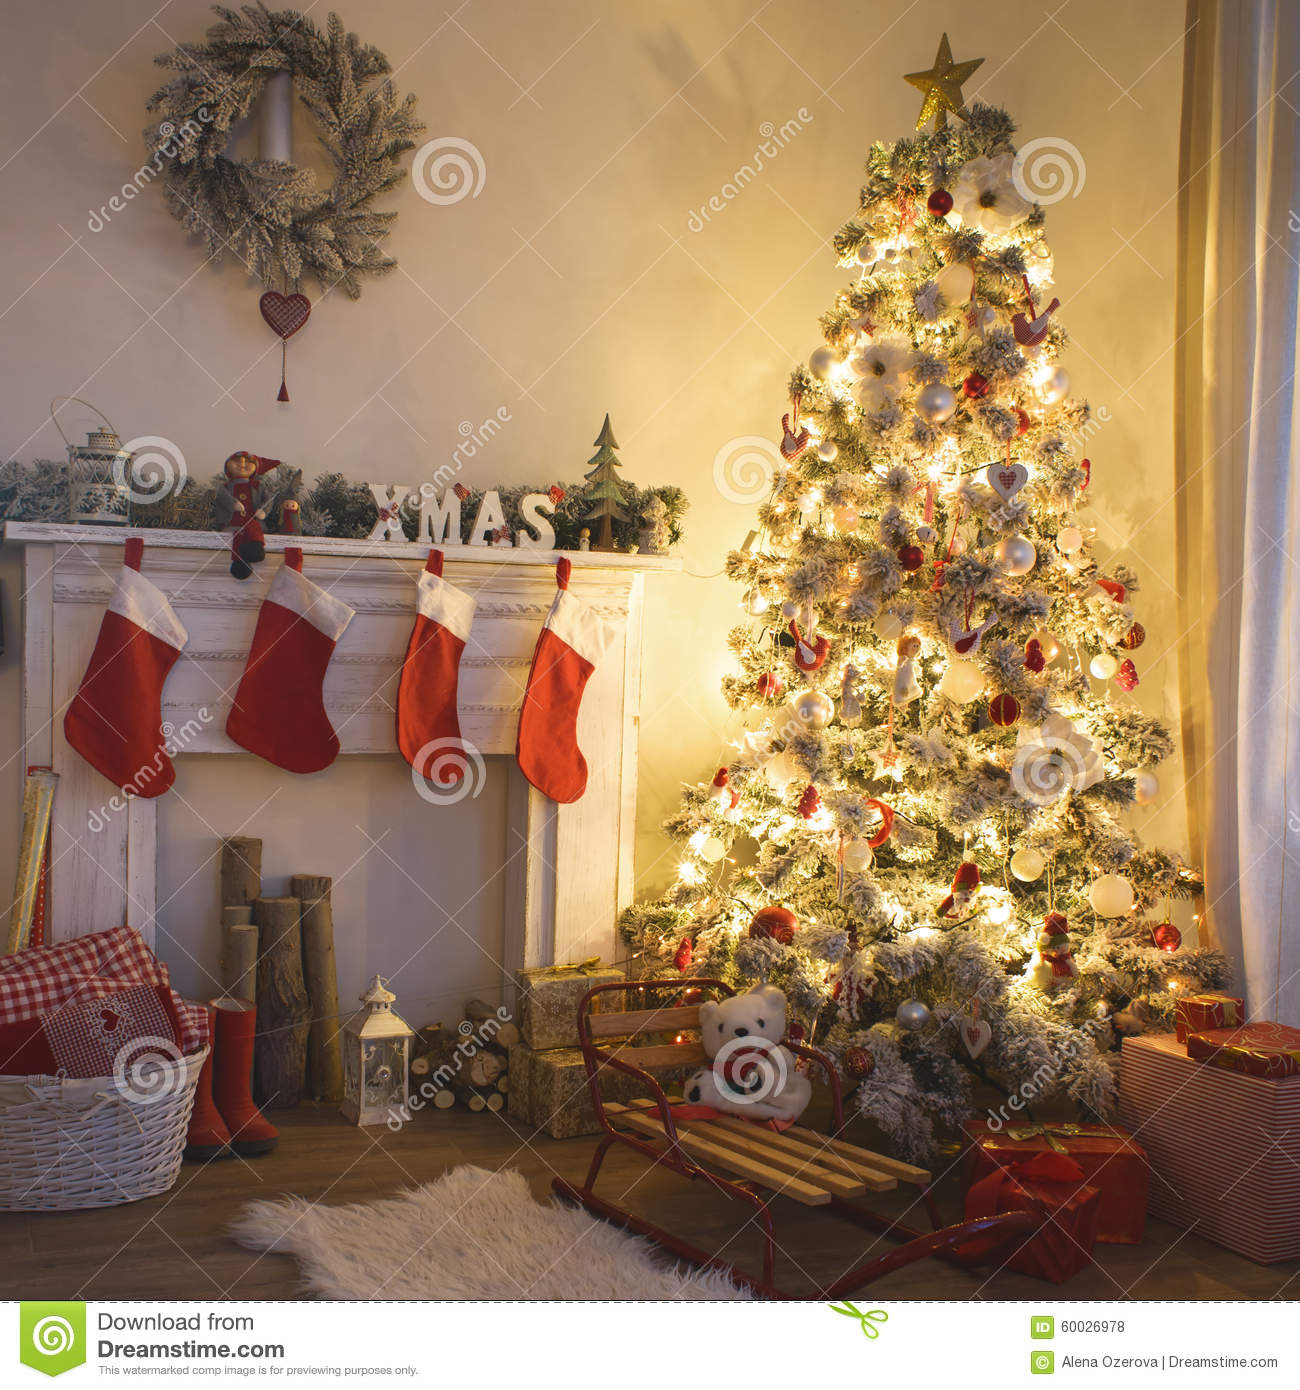 Beautiful Holdiay Decorated Room With Christmas Tree With Presents    